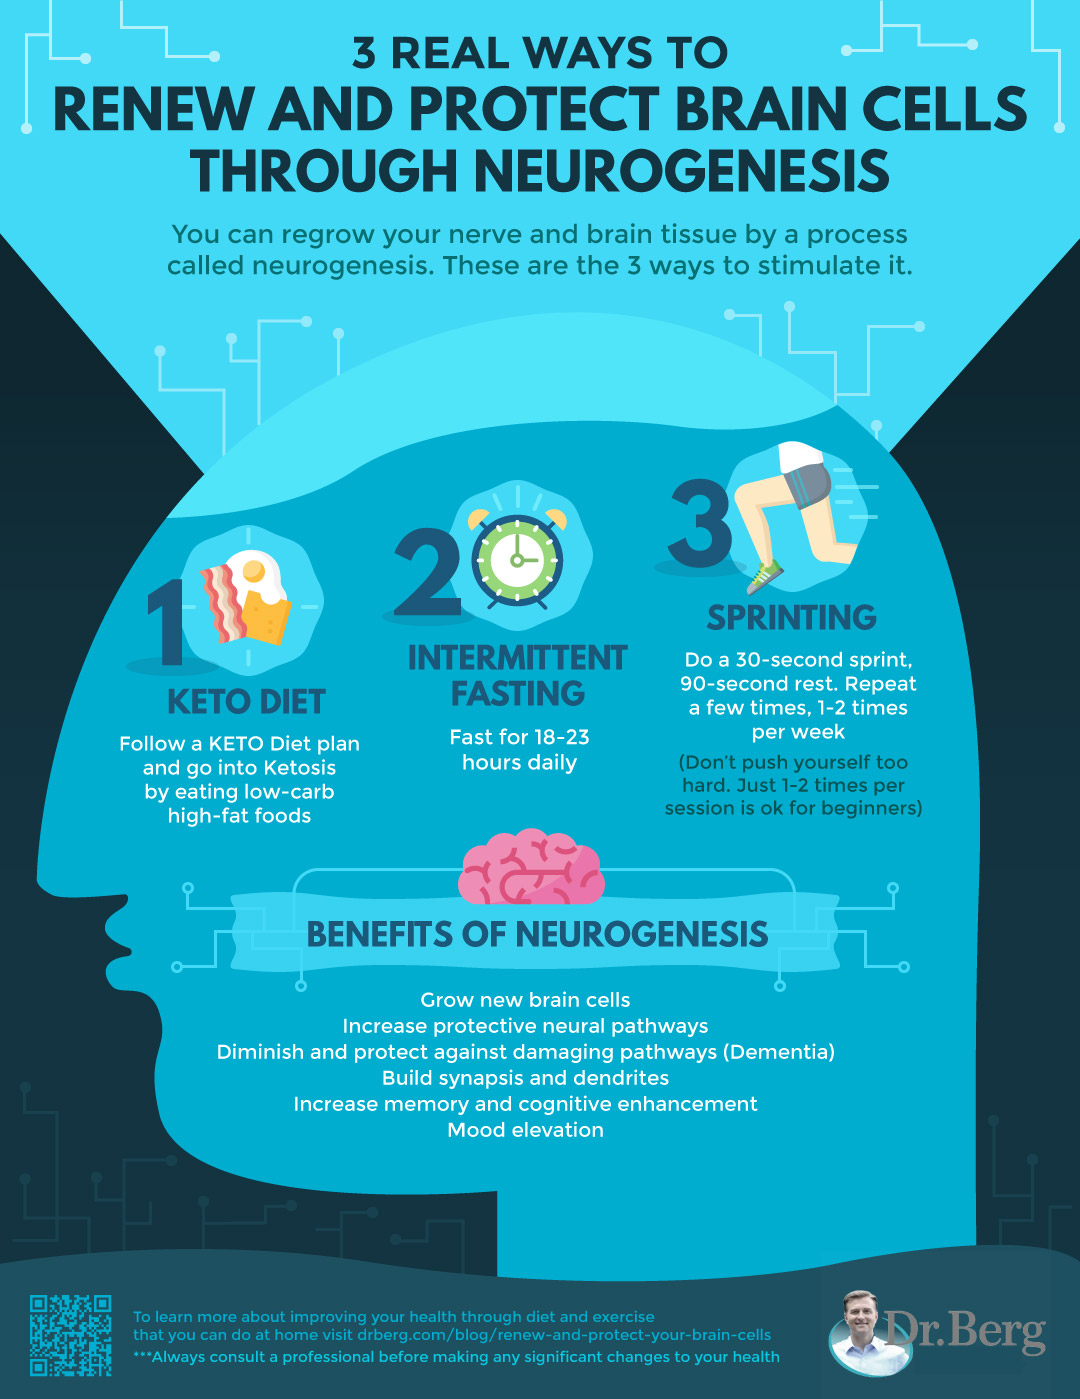 3 Real Ways to Renew and Protect Brain Cells Through Neurogenesis Infographic | Renew and Protect Your Brain Cells